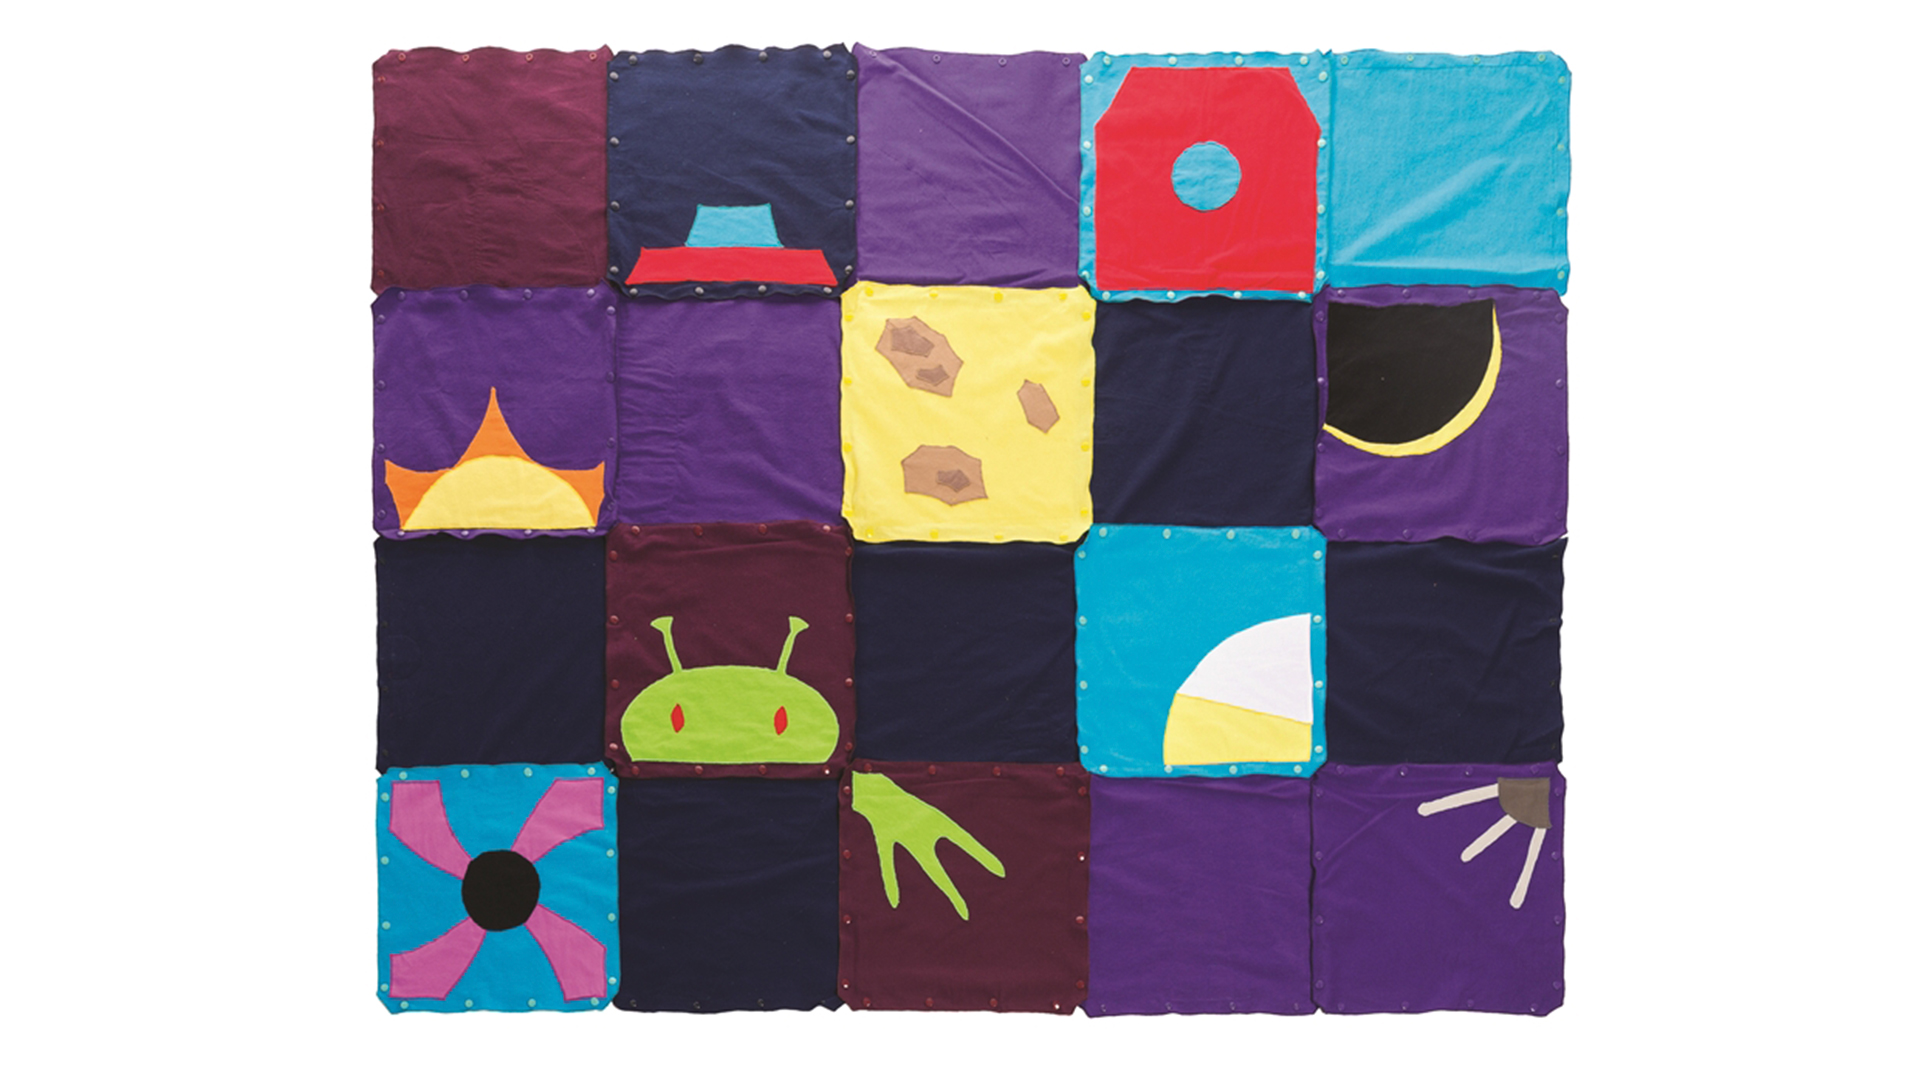 Colorful quilt patches connected into blanket of 4 by 5 dimensions laying flat